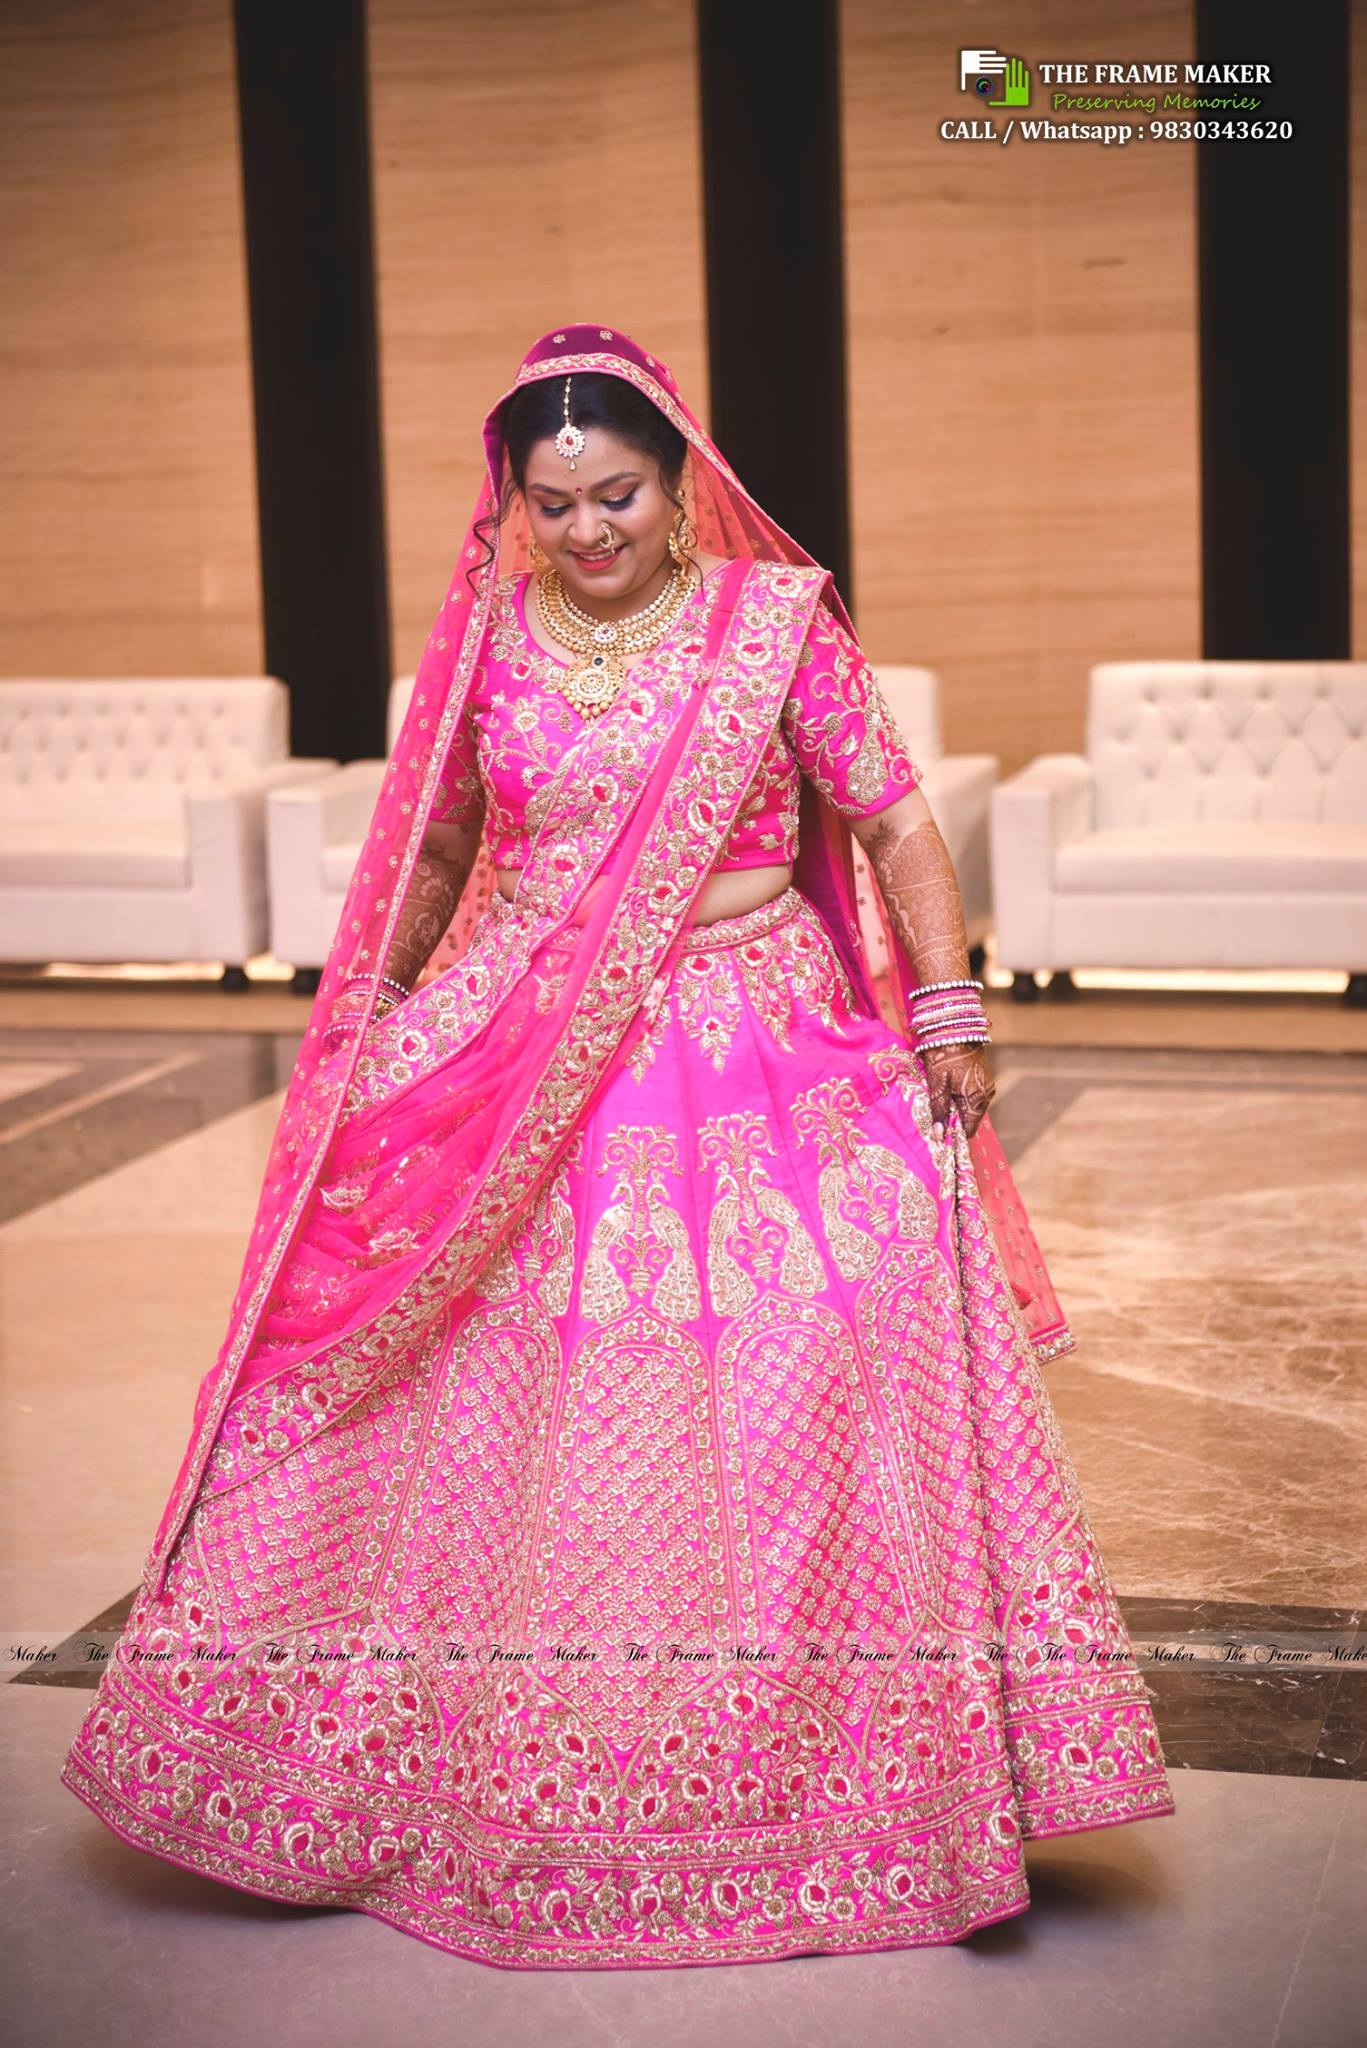 Get the perfect Rajasthani look for wedding: Ideas for Bride and Groom -  Jaipur Stuff